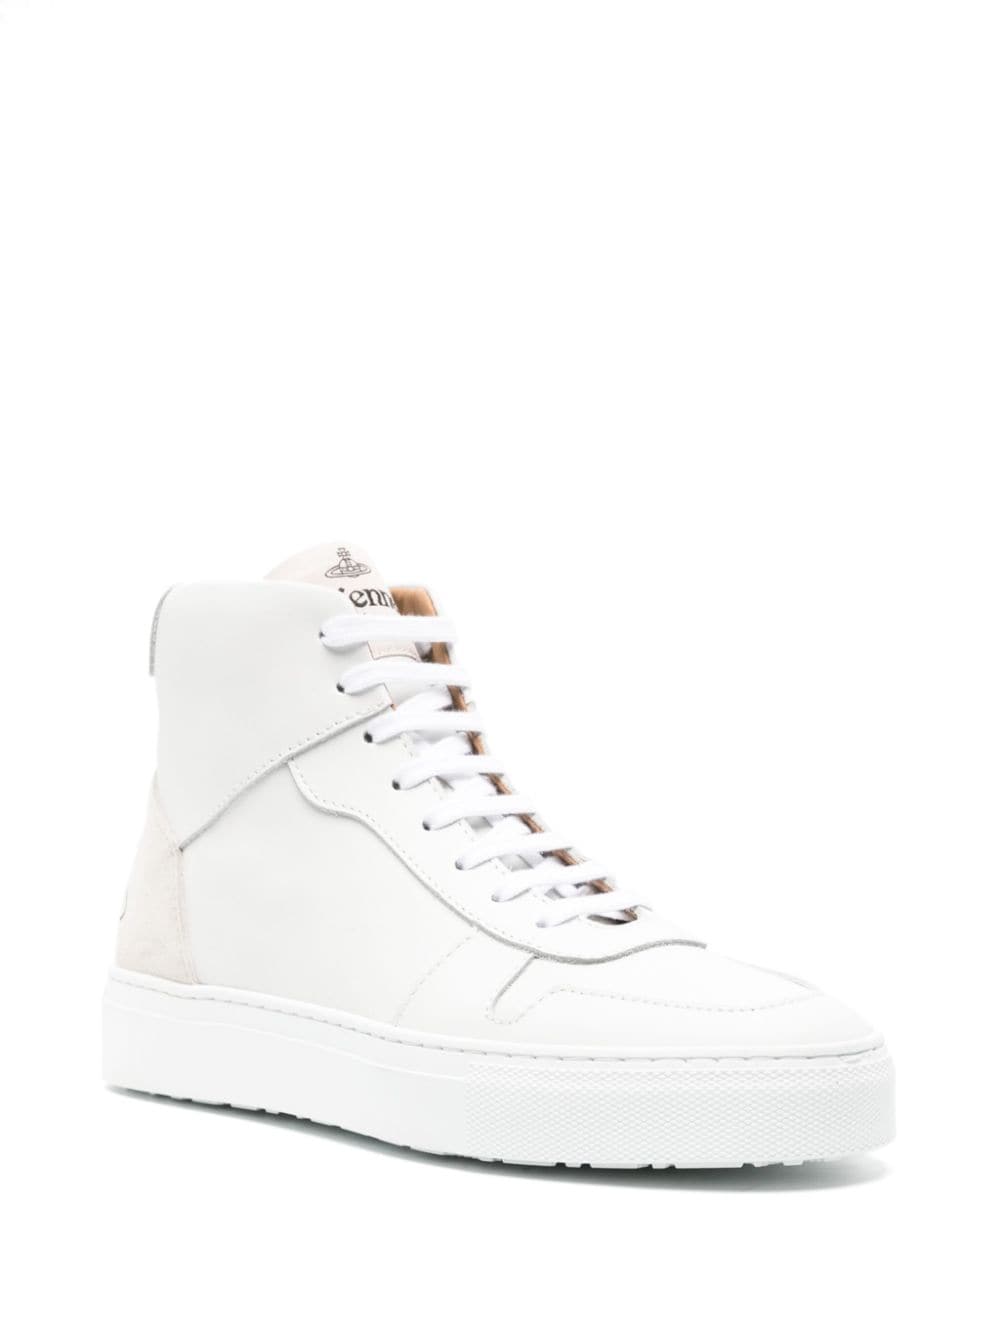 Shop Vivienne Westwood Orb Leather High-top Sneakers In Weiss